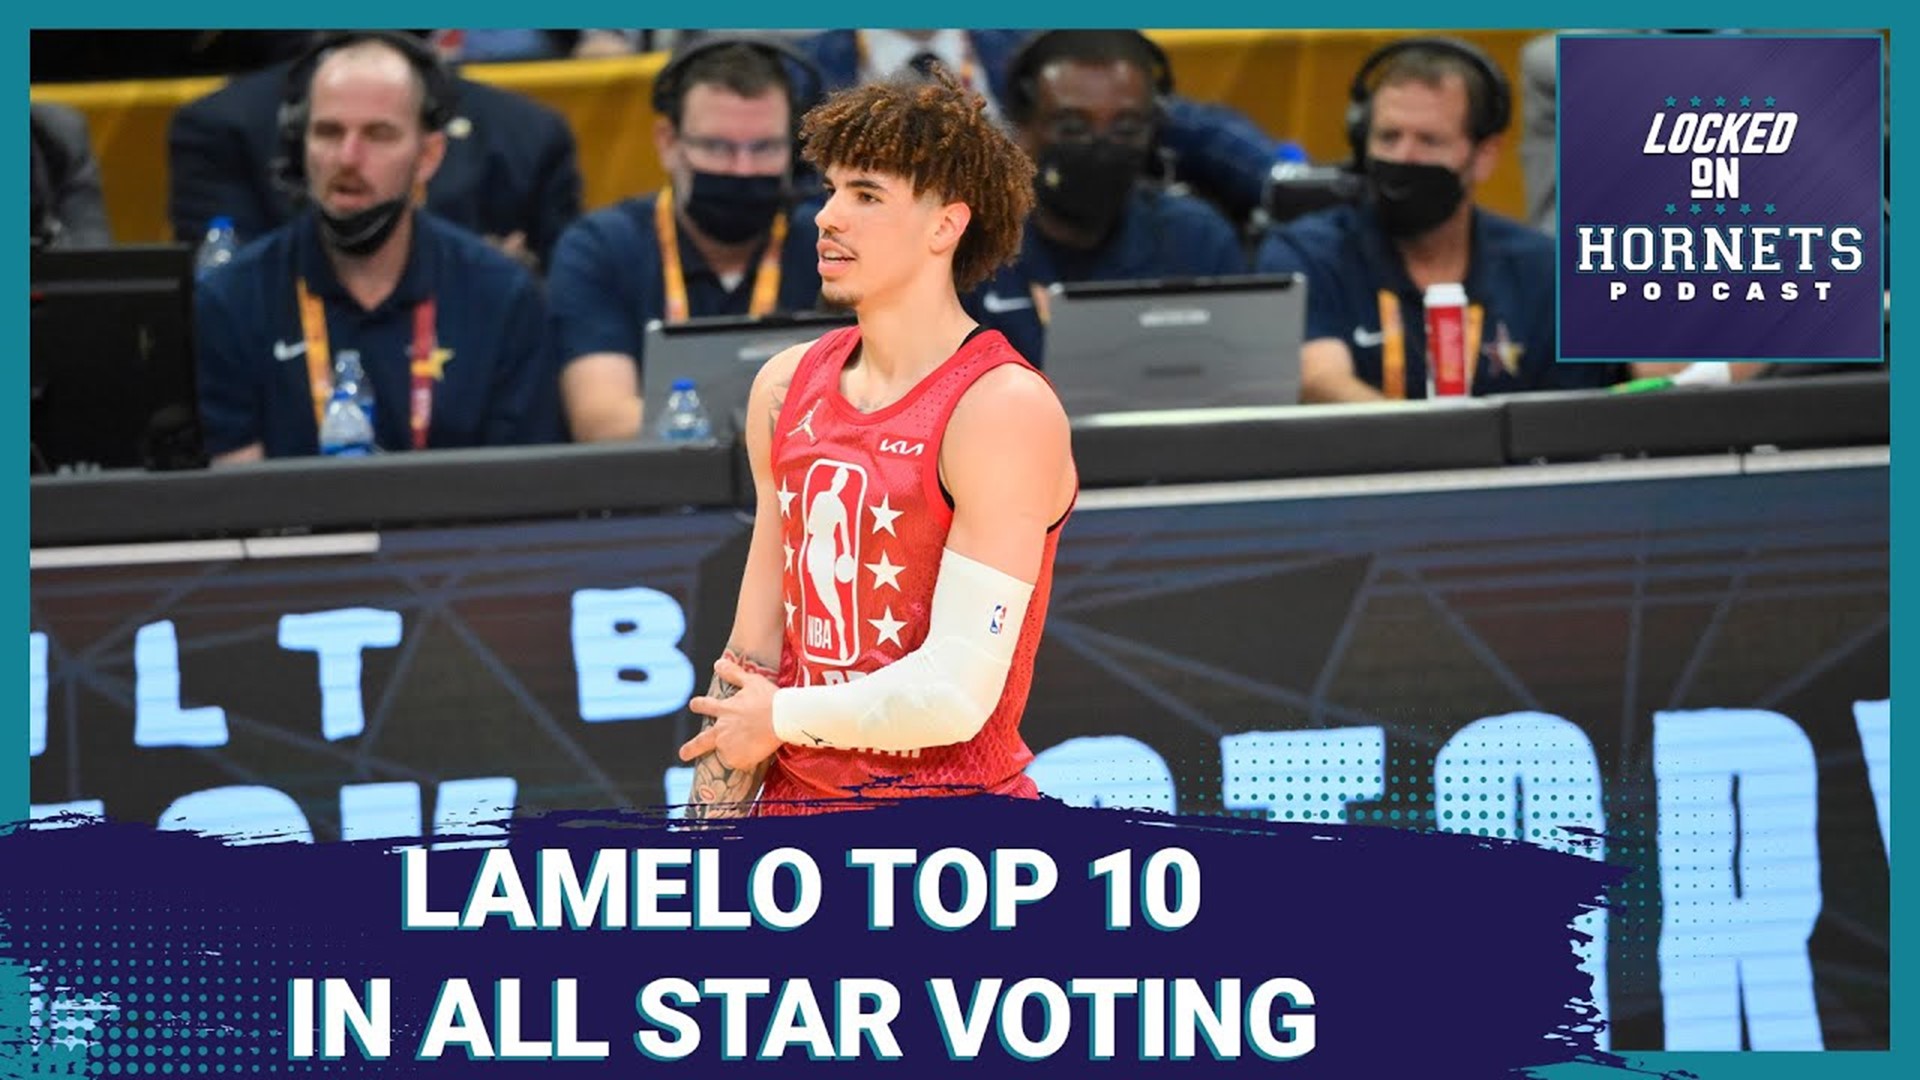 LaMelo Ball finished 7th among guards in the All-Star Fan Voting results.